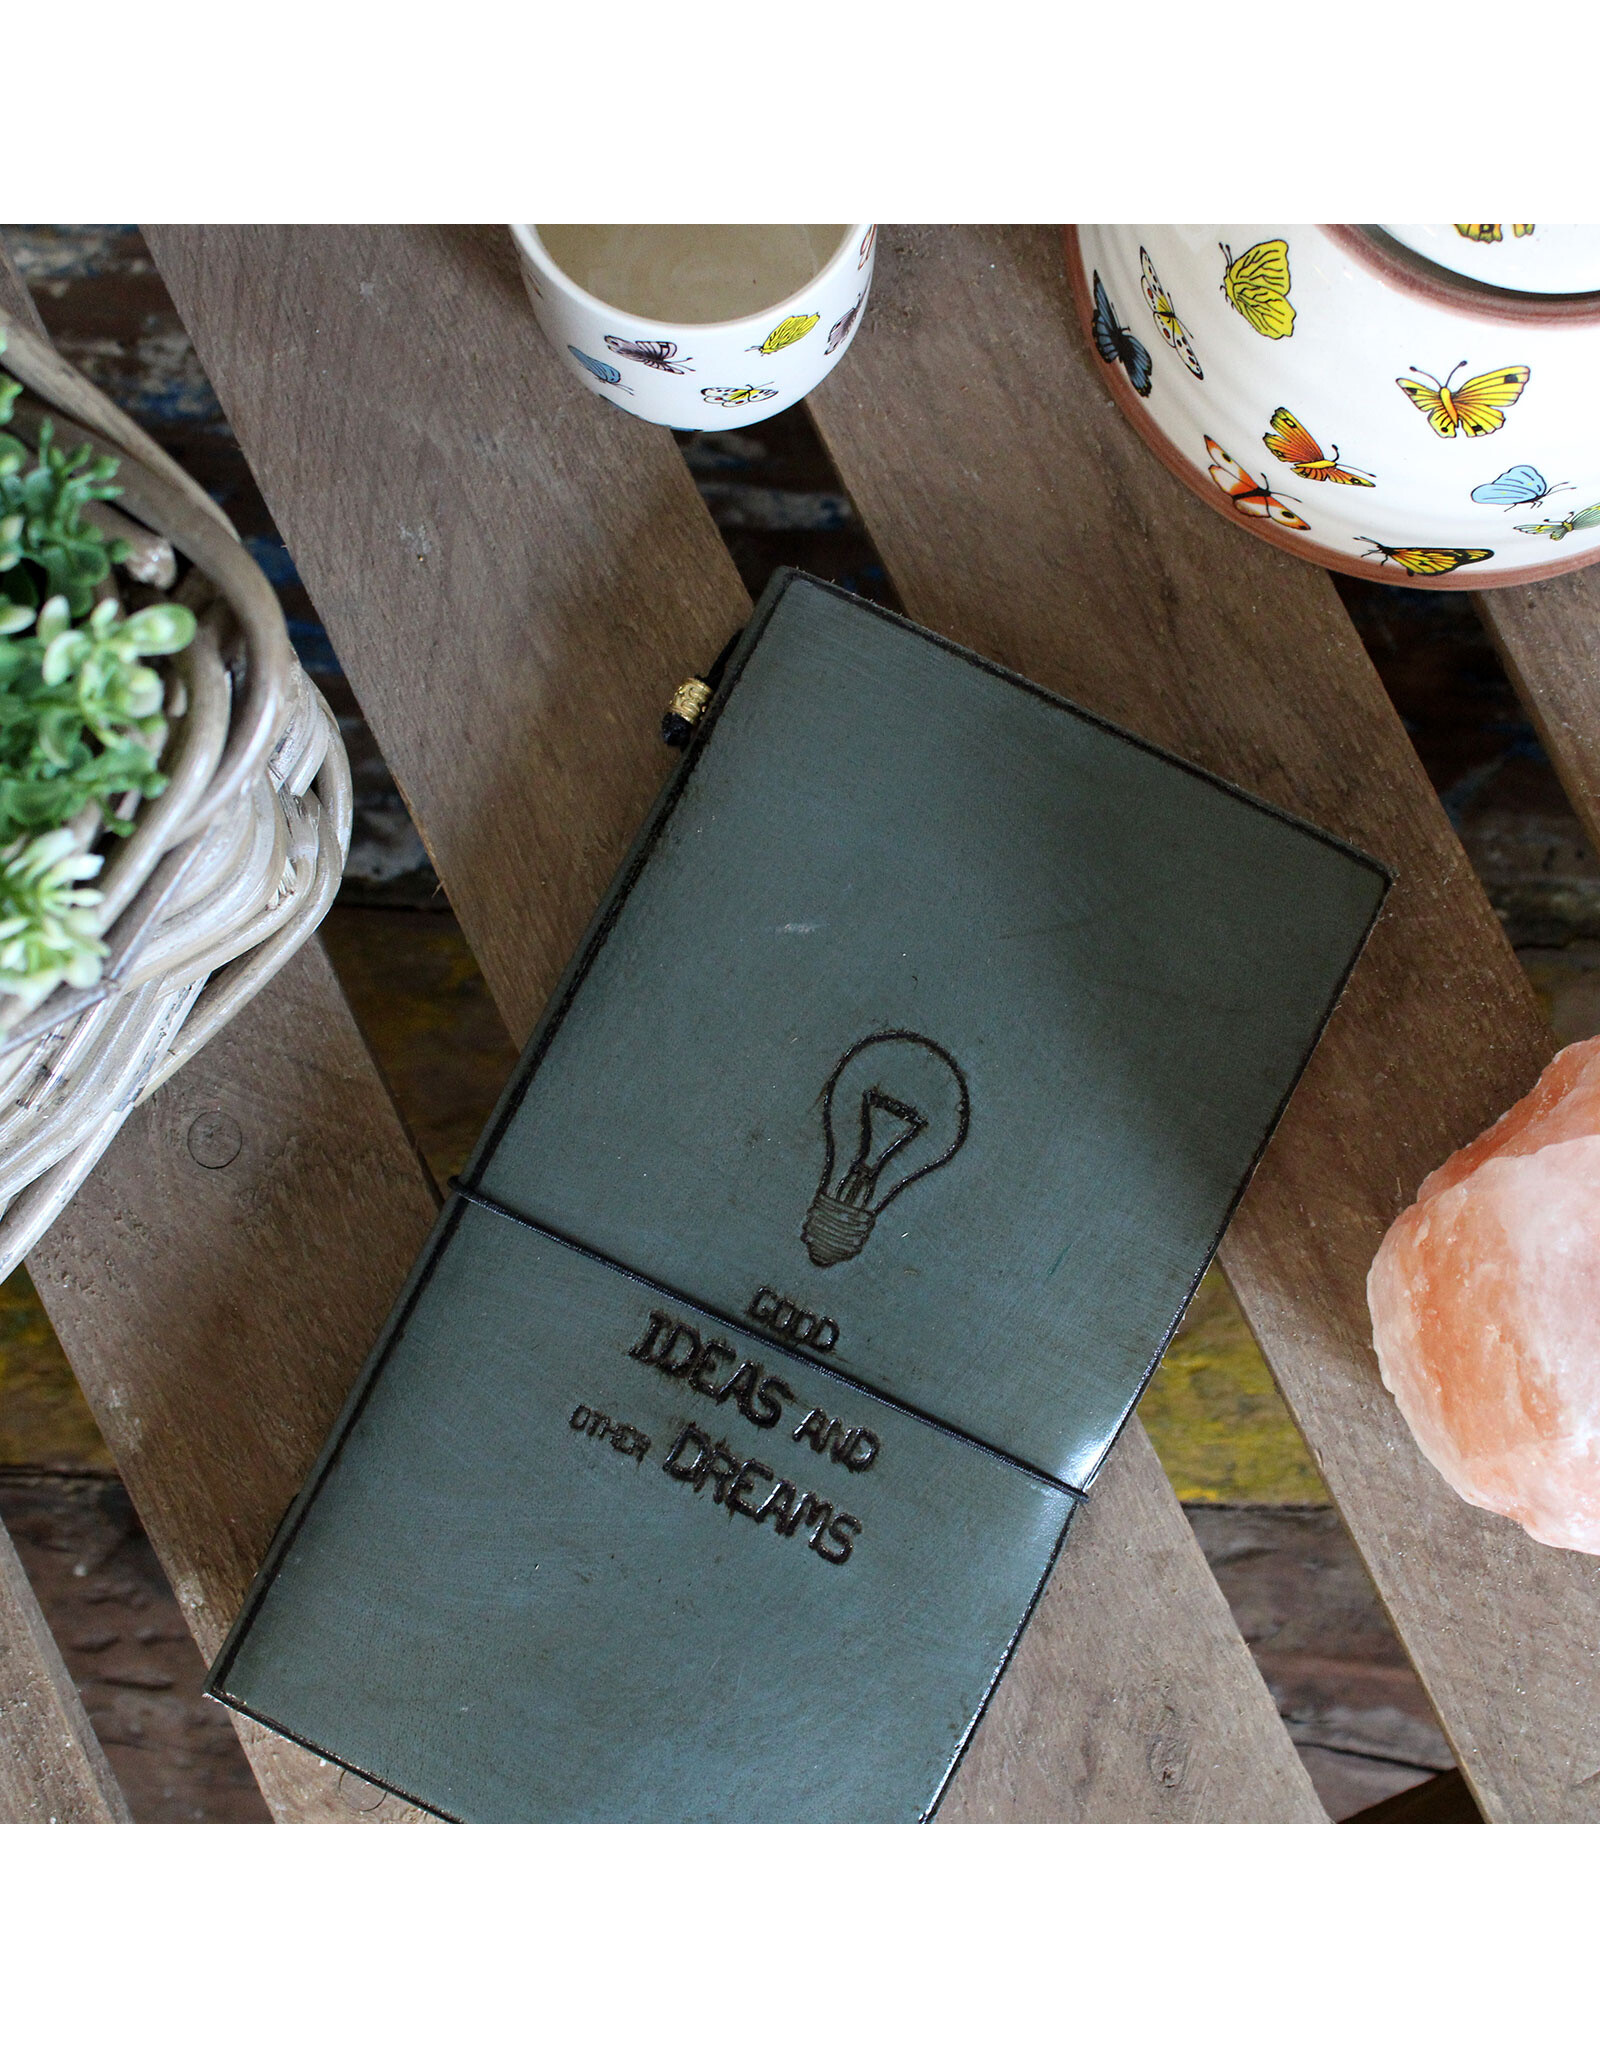 AWG Miscellaneous - Leather Journal 'Good Ideas and Other Dreams' - Copy